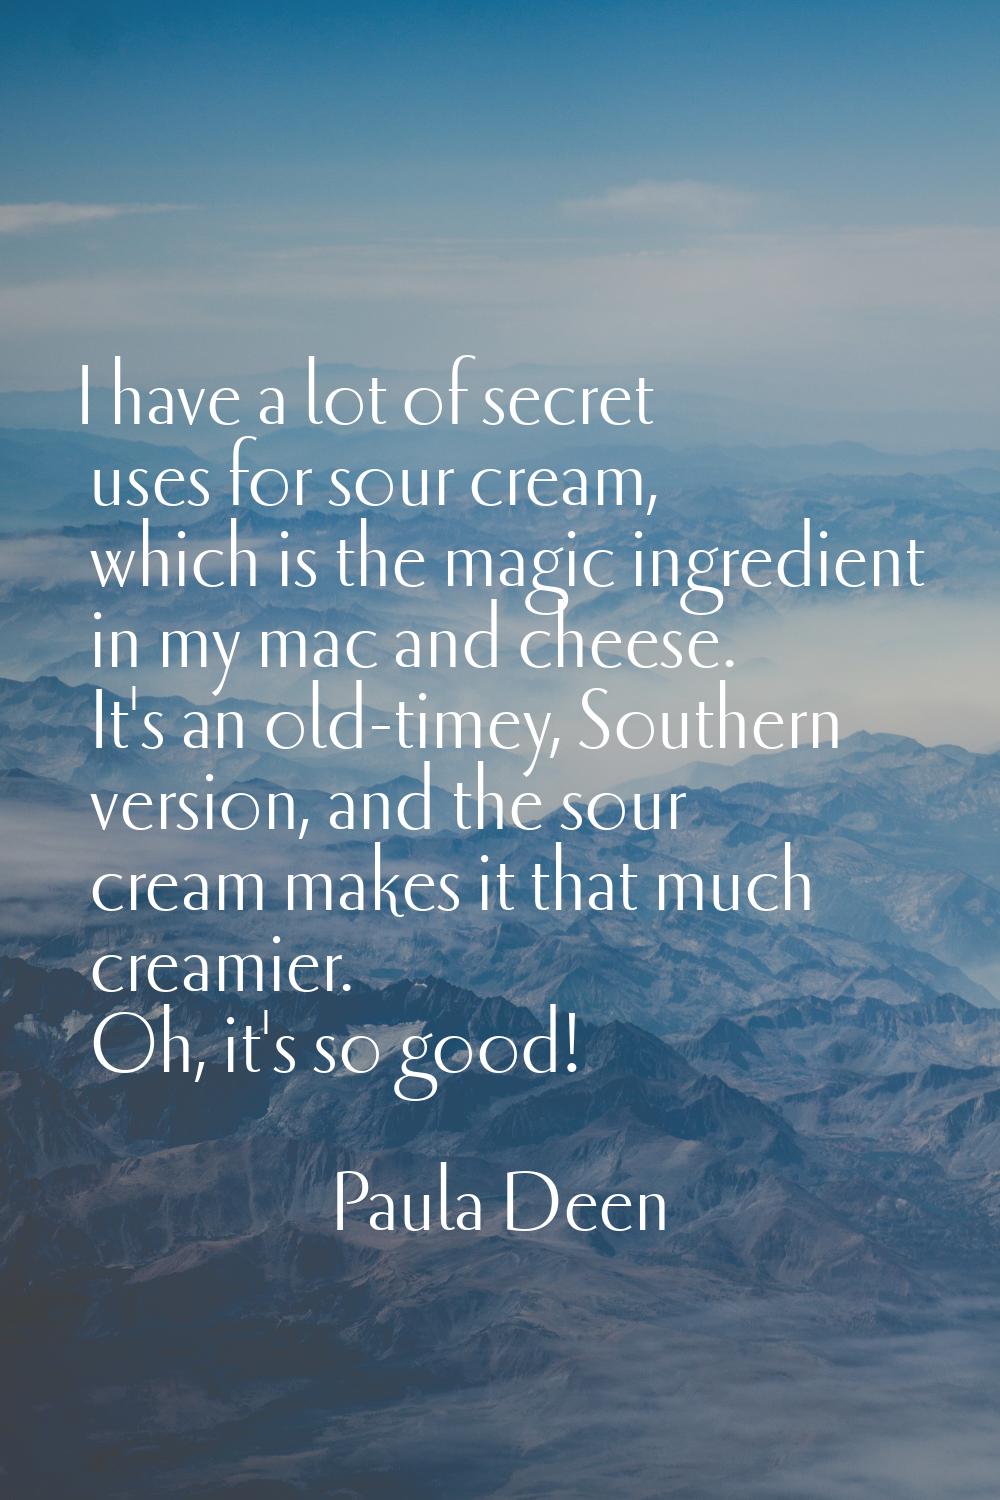 I have a lot of secret uses for sour cream, which is the magic ingredient in my mac and cheese. It'